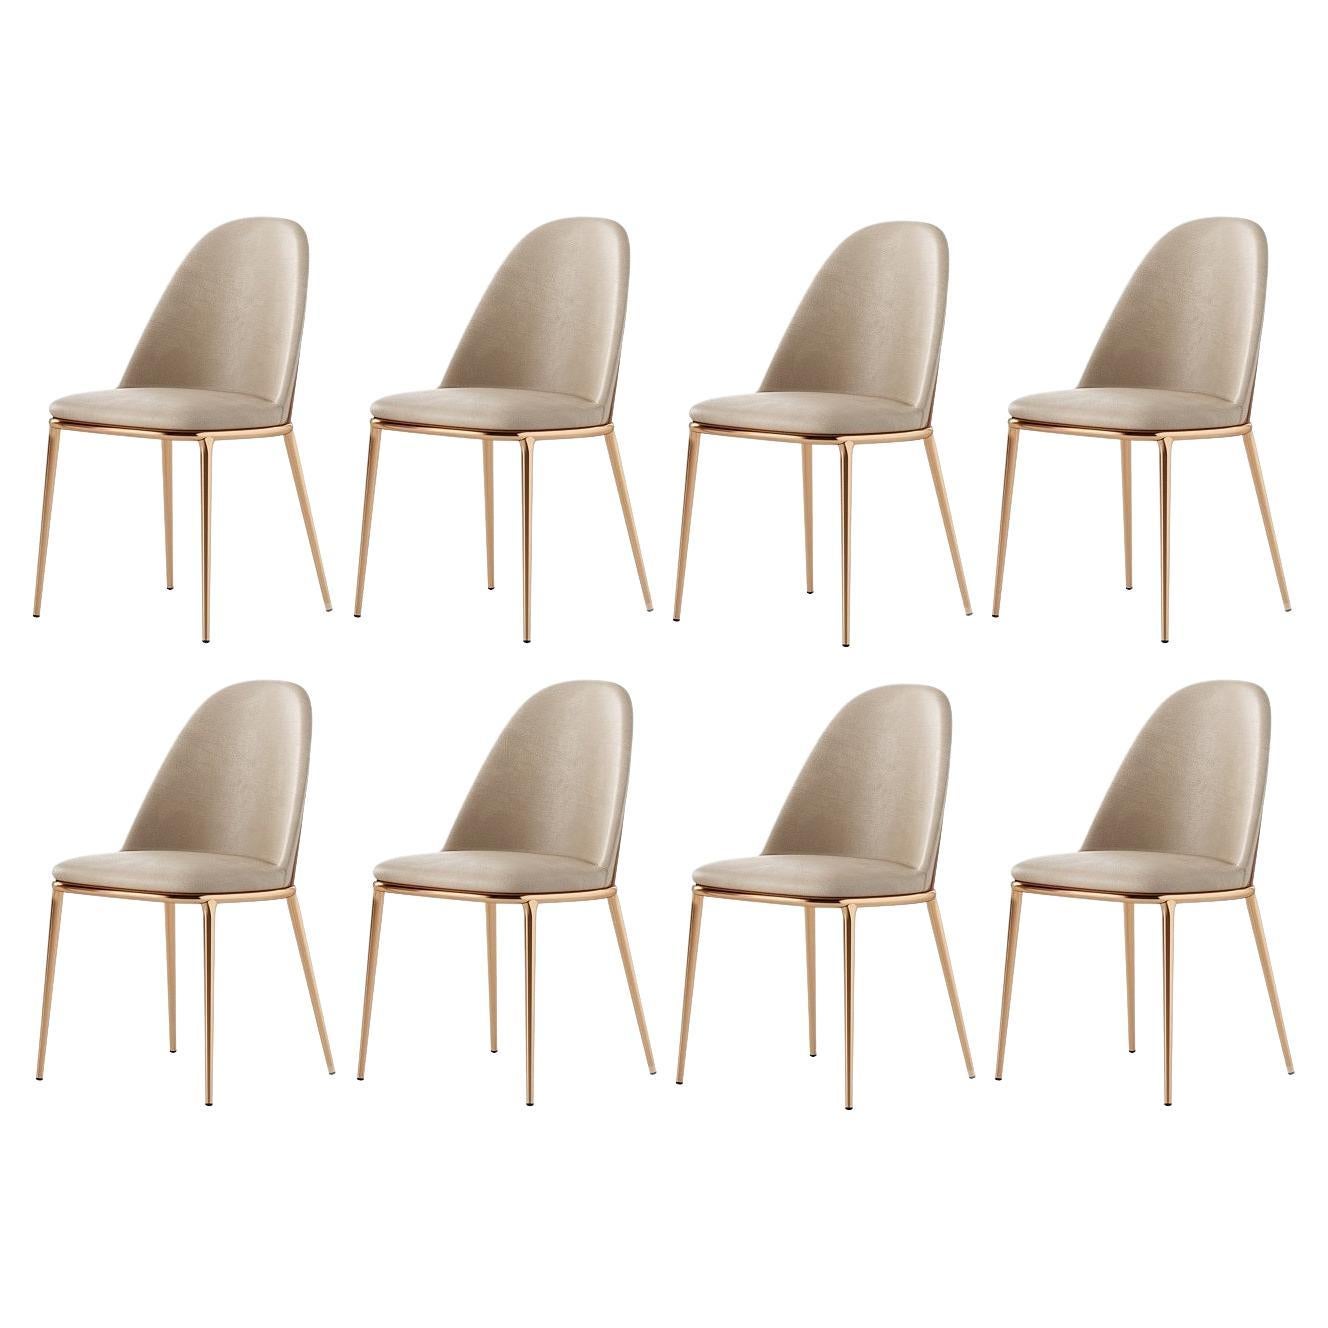 Set of 8 Dining Chairs in Metallic Frame